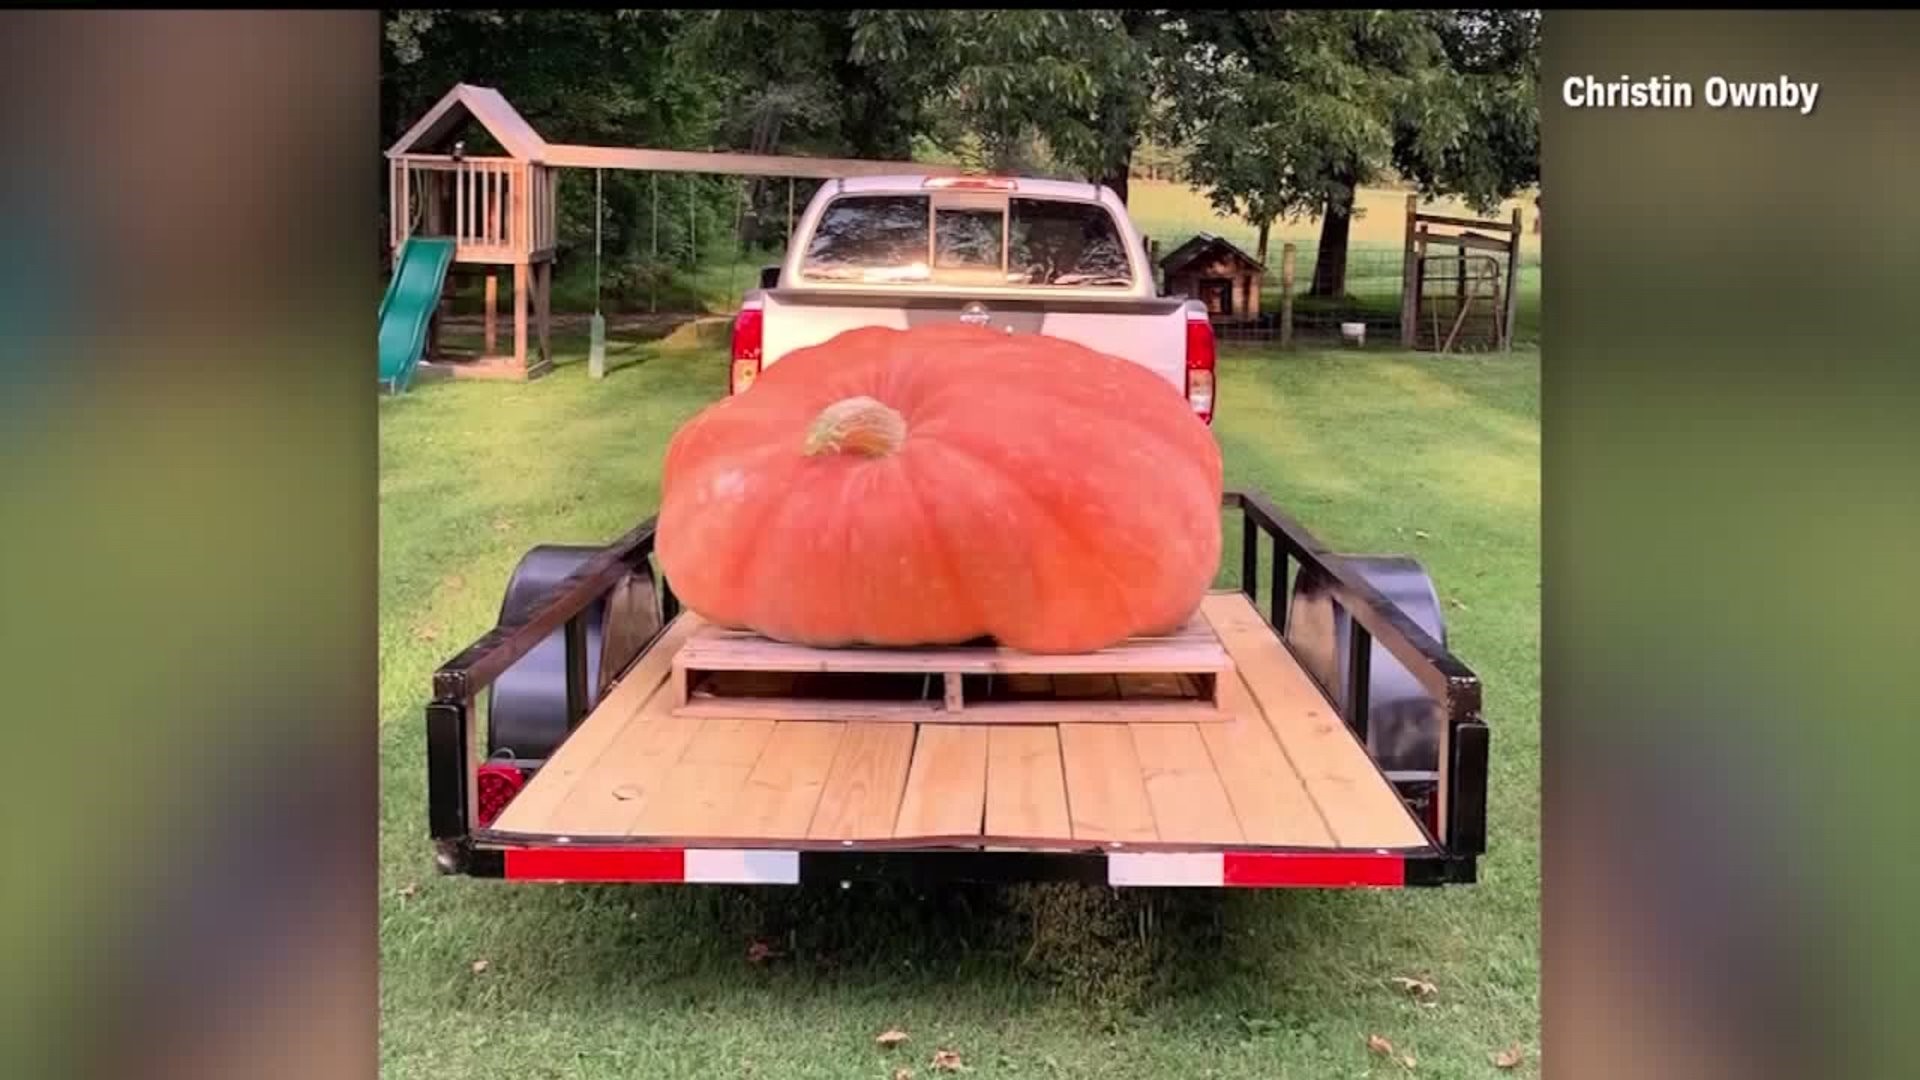 He grew a 910-pound pumpkin and then used it as a boat